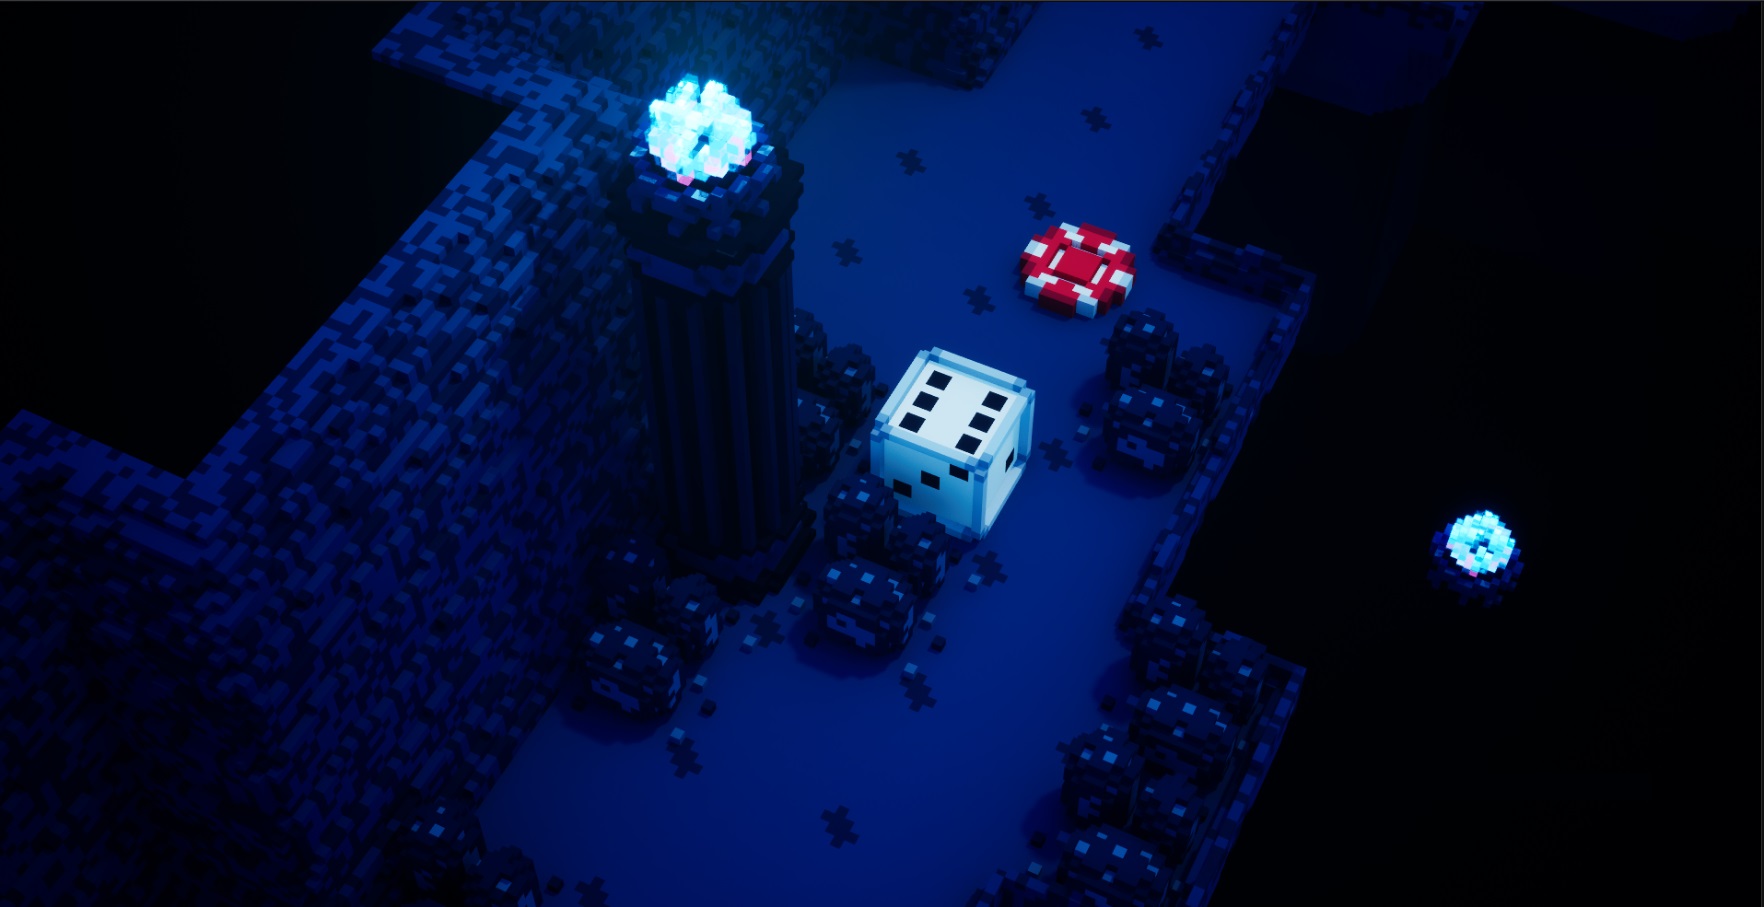 Domino Den gameplay screenshot. There is a die with no spells attached in the center. A lone red chip idles ahead. The path is bordered by abyss, punctuated by blue firepits.